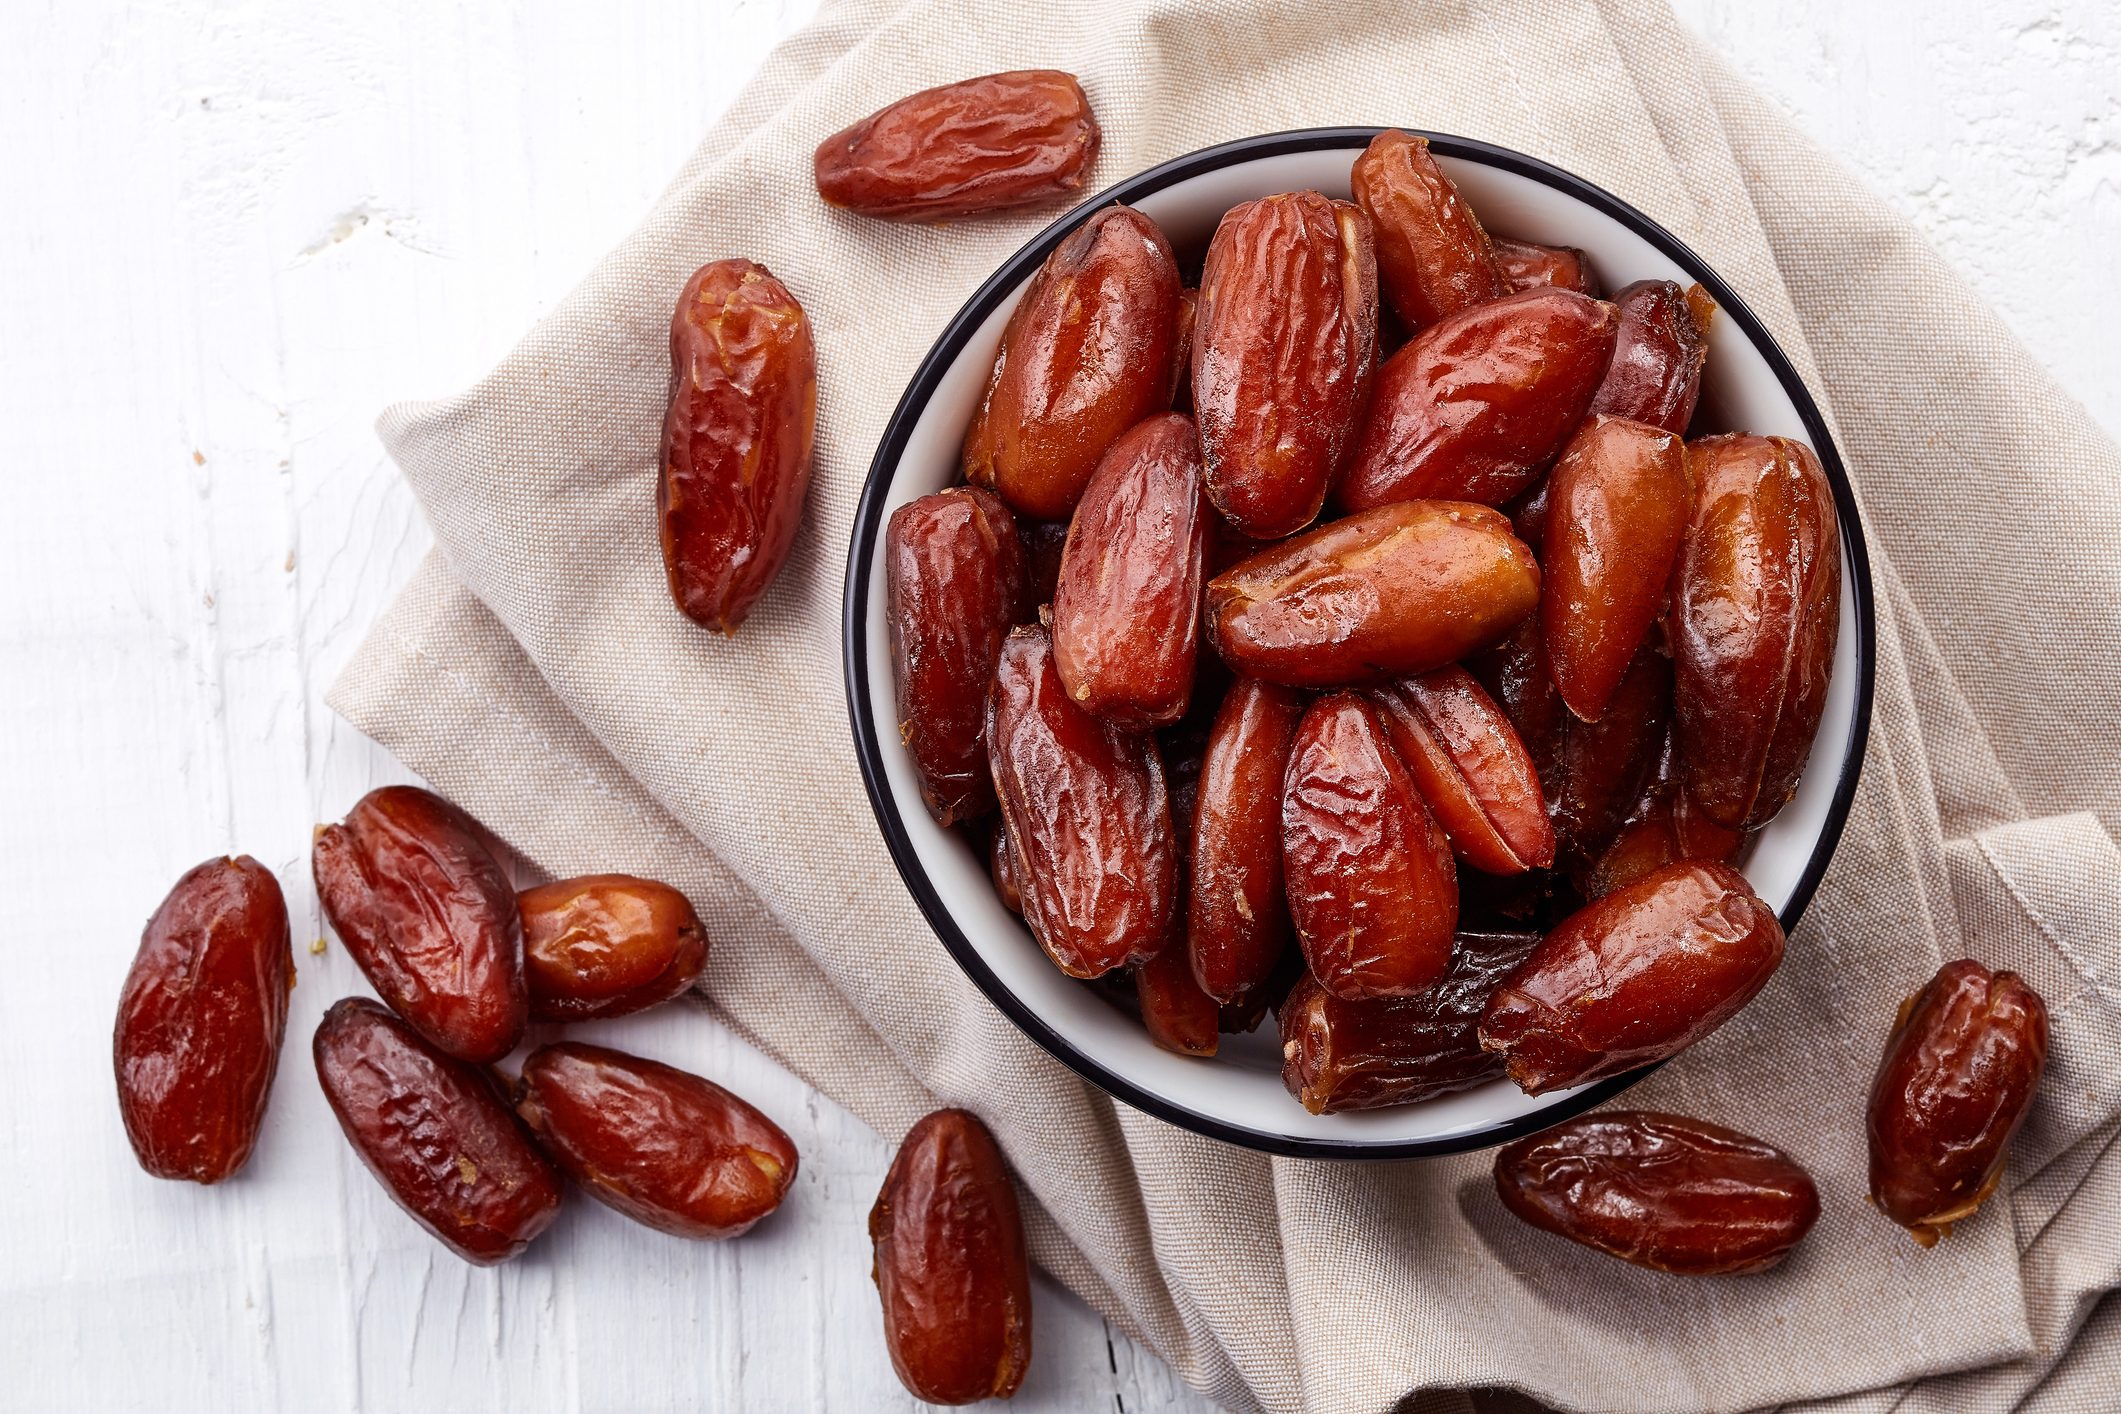 10 Health Benefits of Dates (According to a Registered Dietitian)